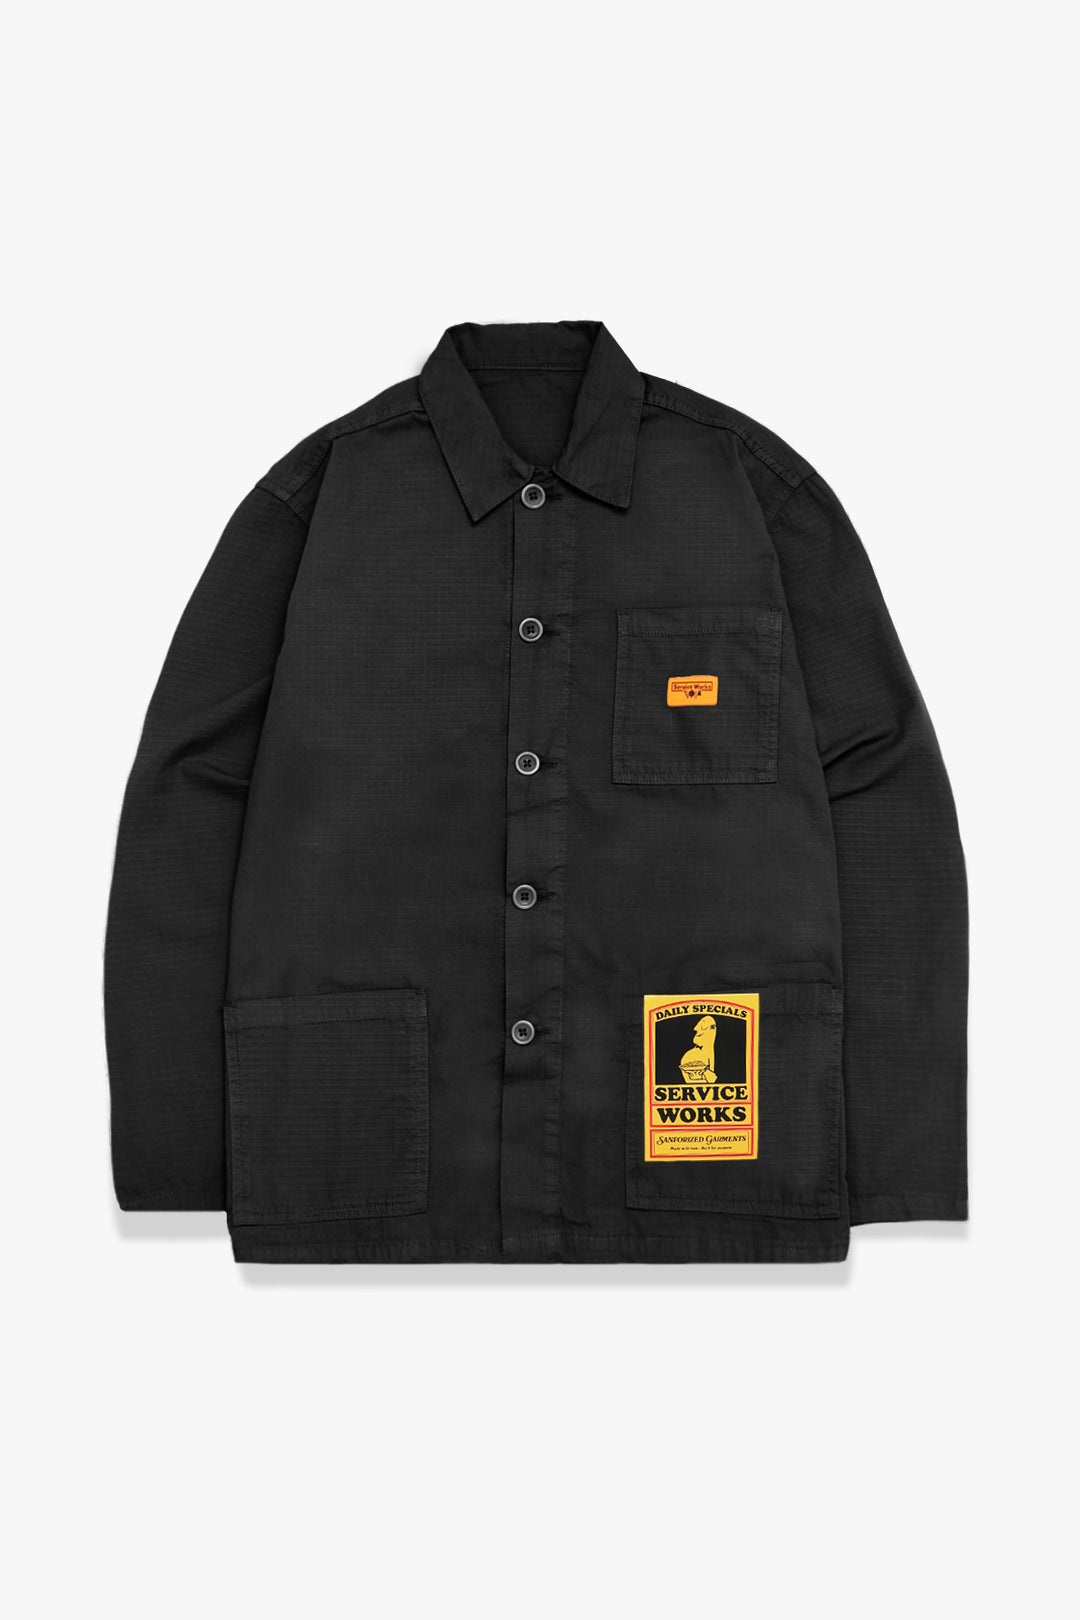 Service Works - Ripstop Coverall Jacket - Black